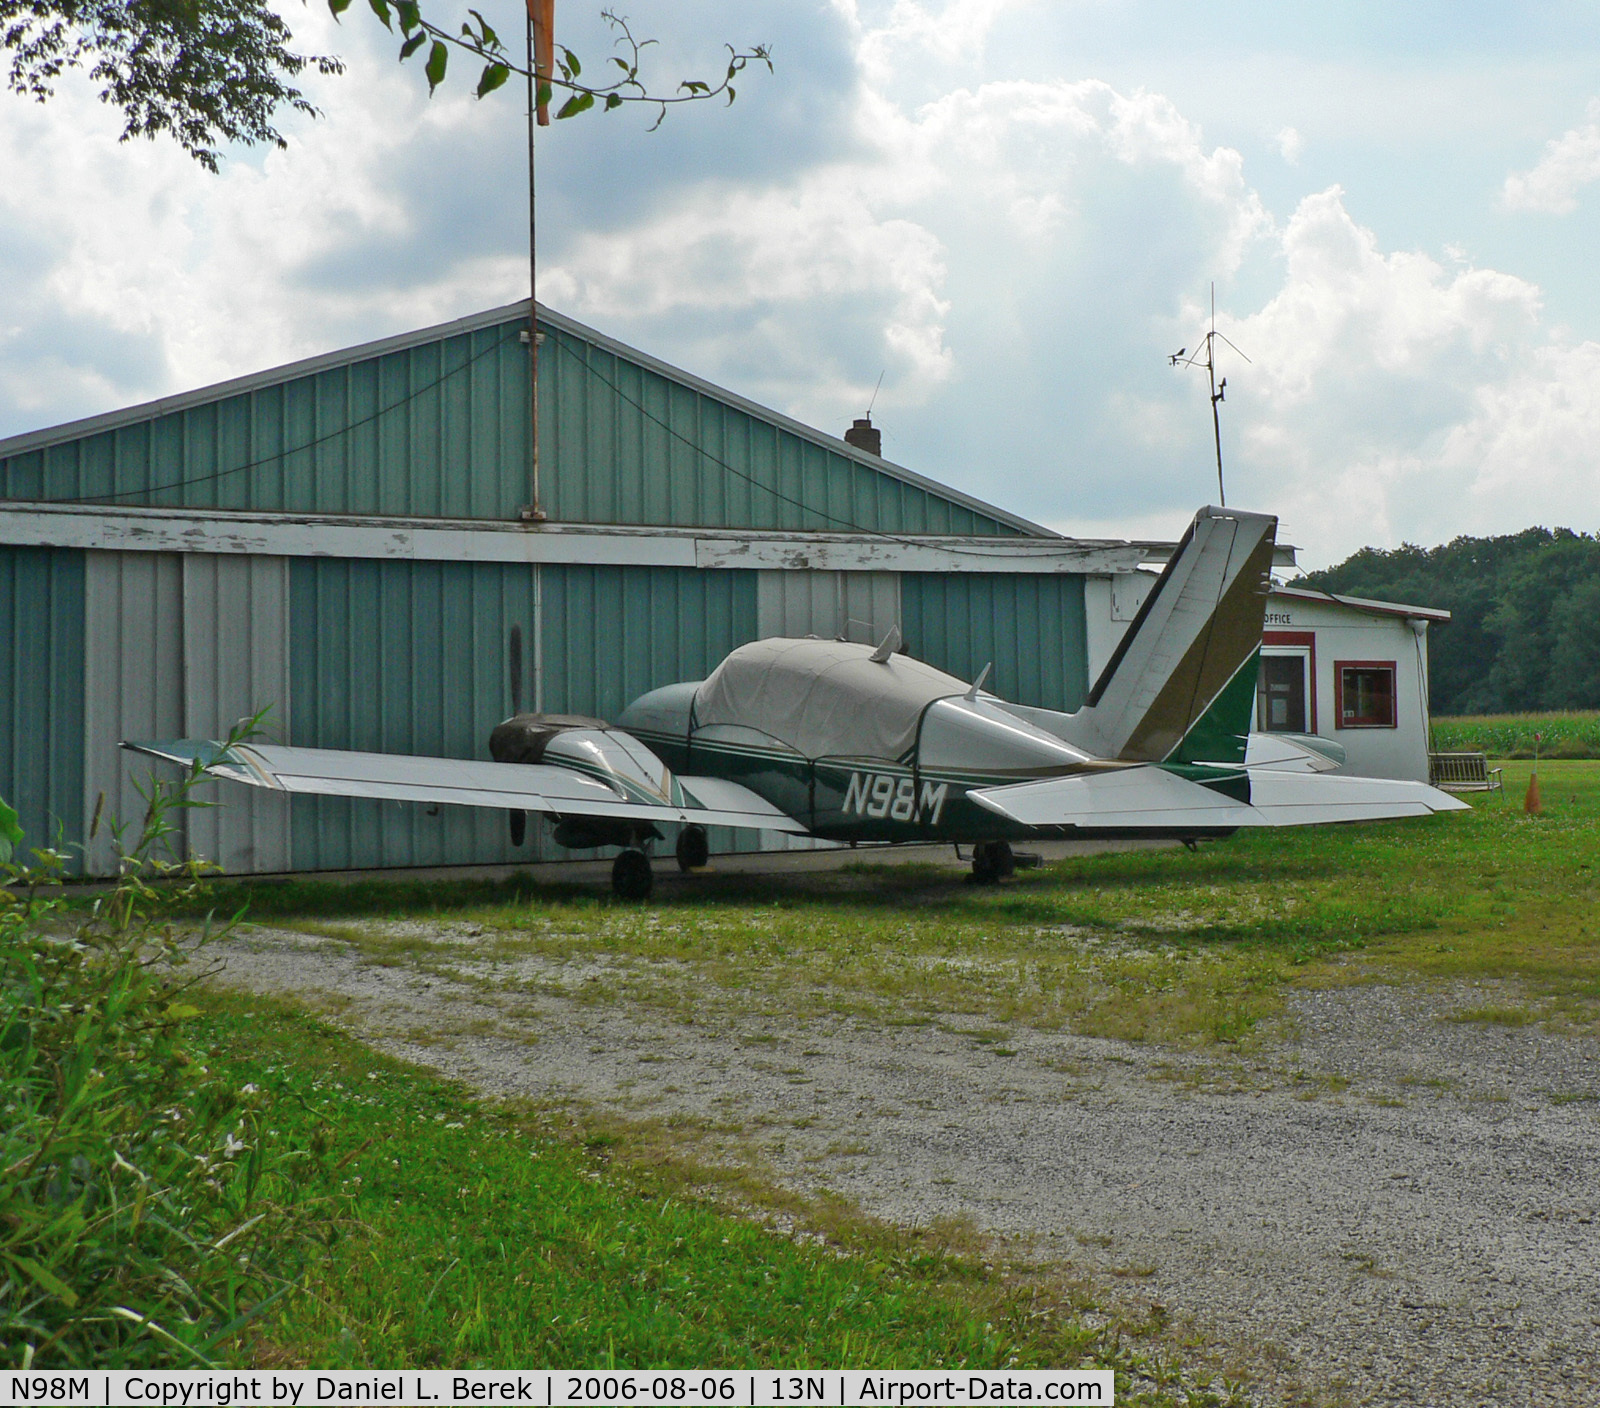 N98M, Piper PA-23-250 C/N 27-7554043, Piper Aztec rests in front of Trinca Airport corporate headquarters.